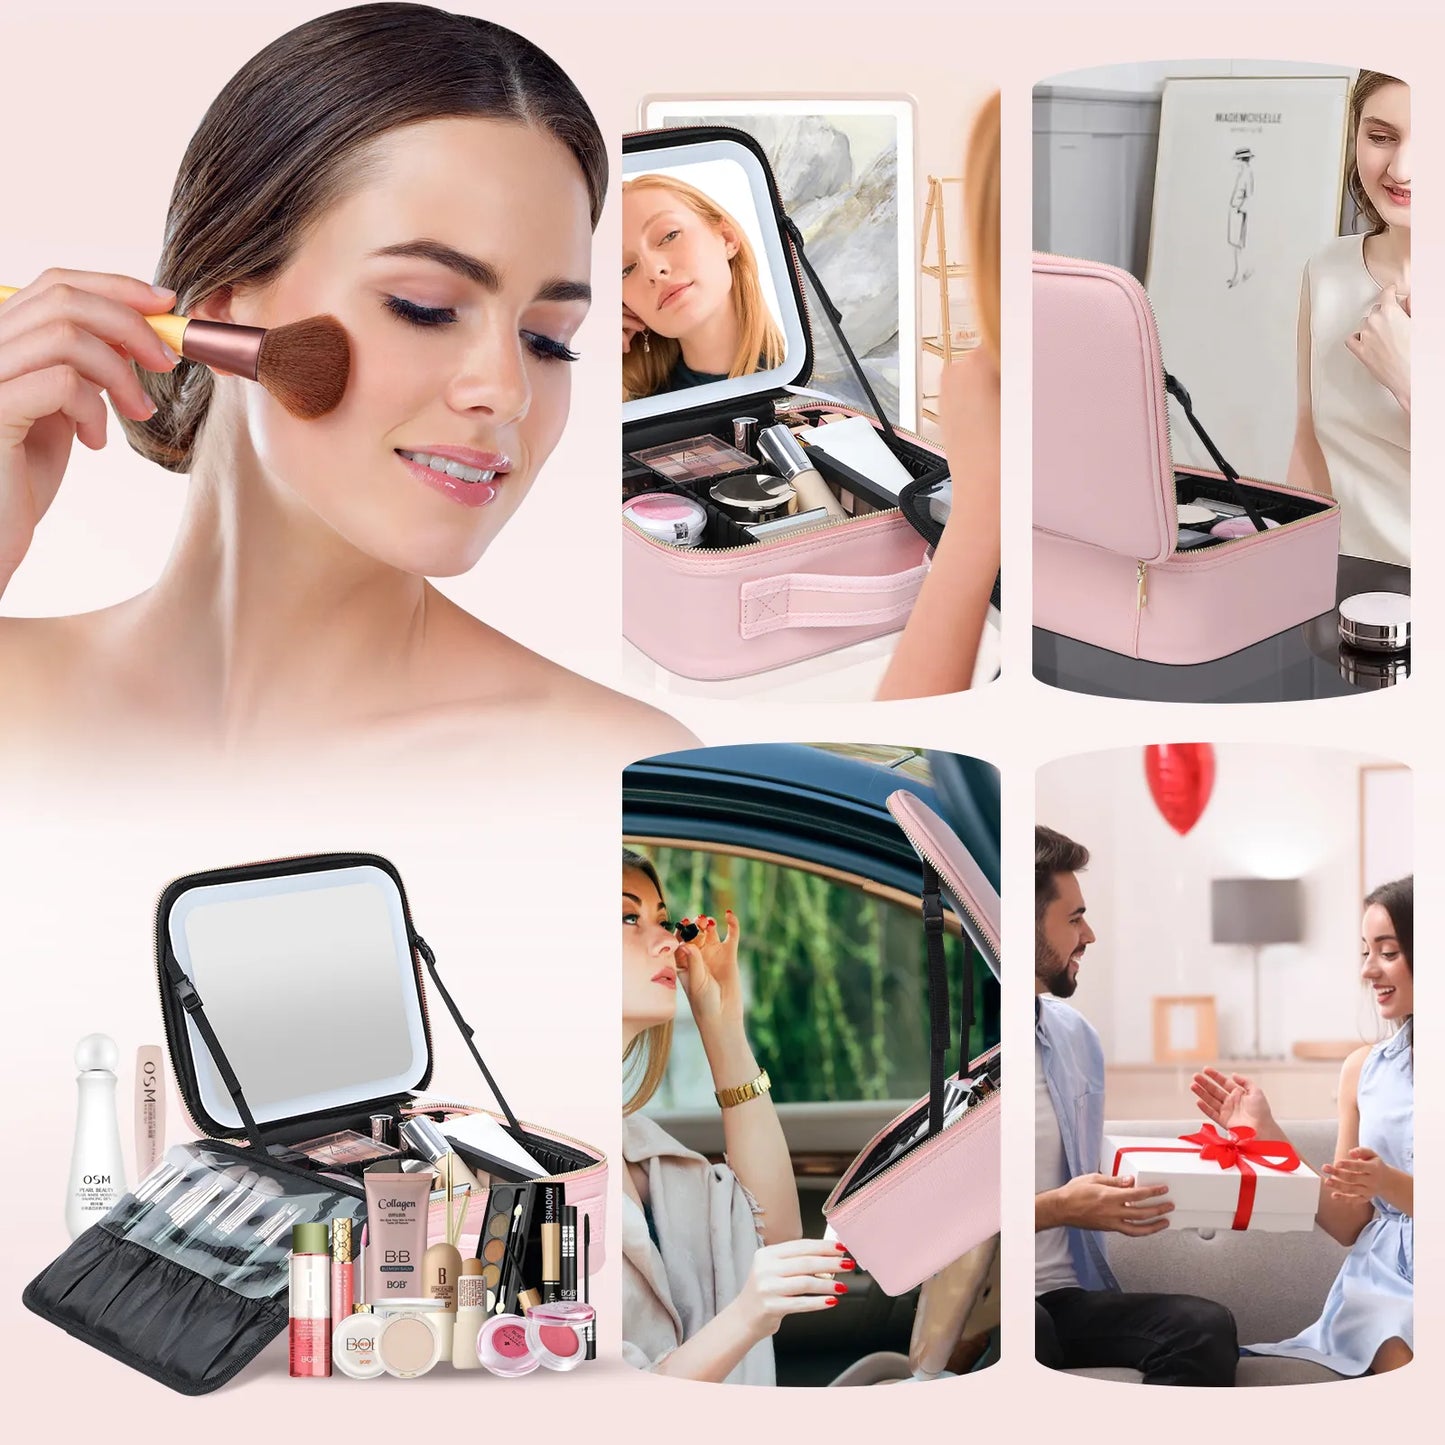 Stylish LED-Lit PU Leather Makeup Bag with Mirror: Waterproof, Detachable Compartments for Traveling Ladies